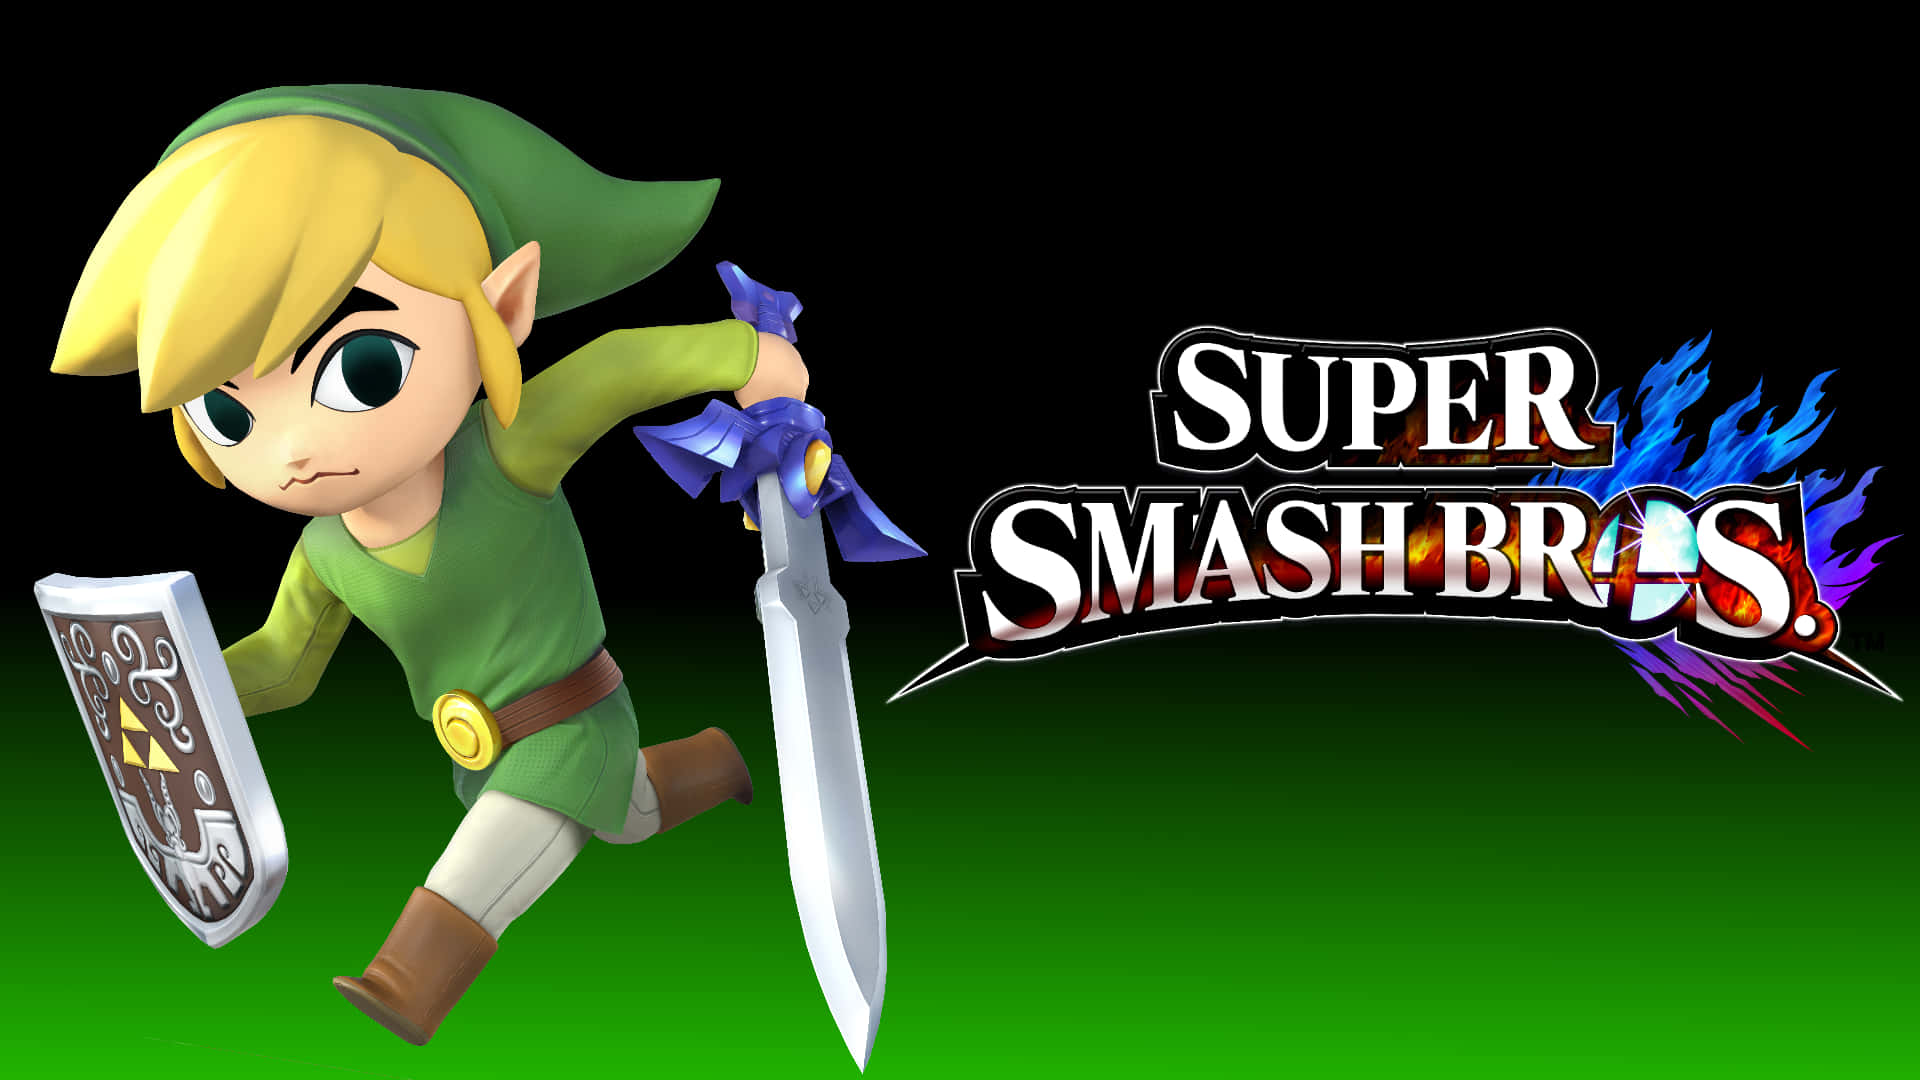 Toon Link With The Flaming Super Smash Bros Logo Background